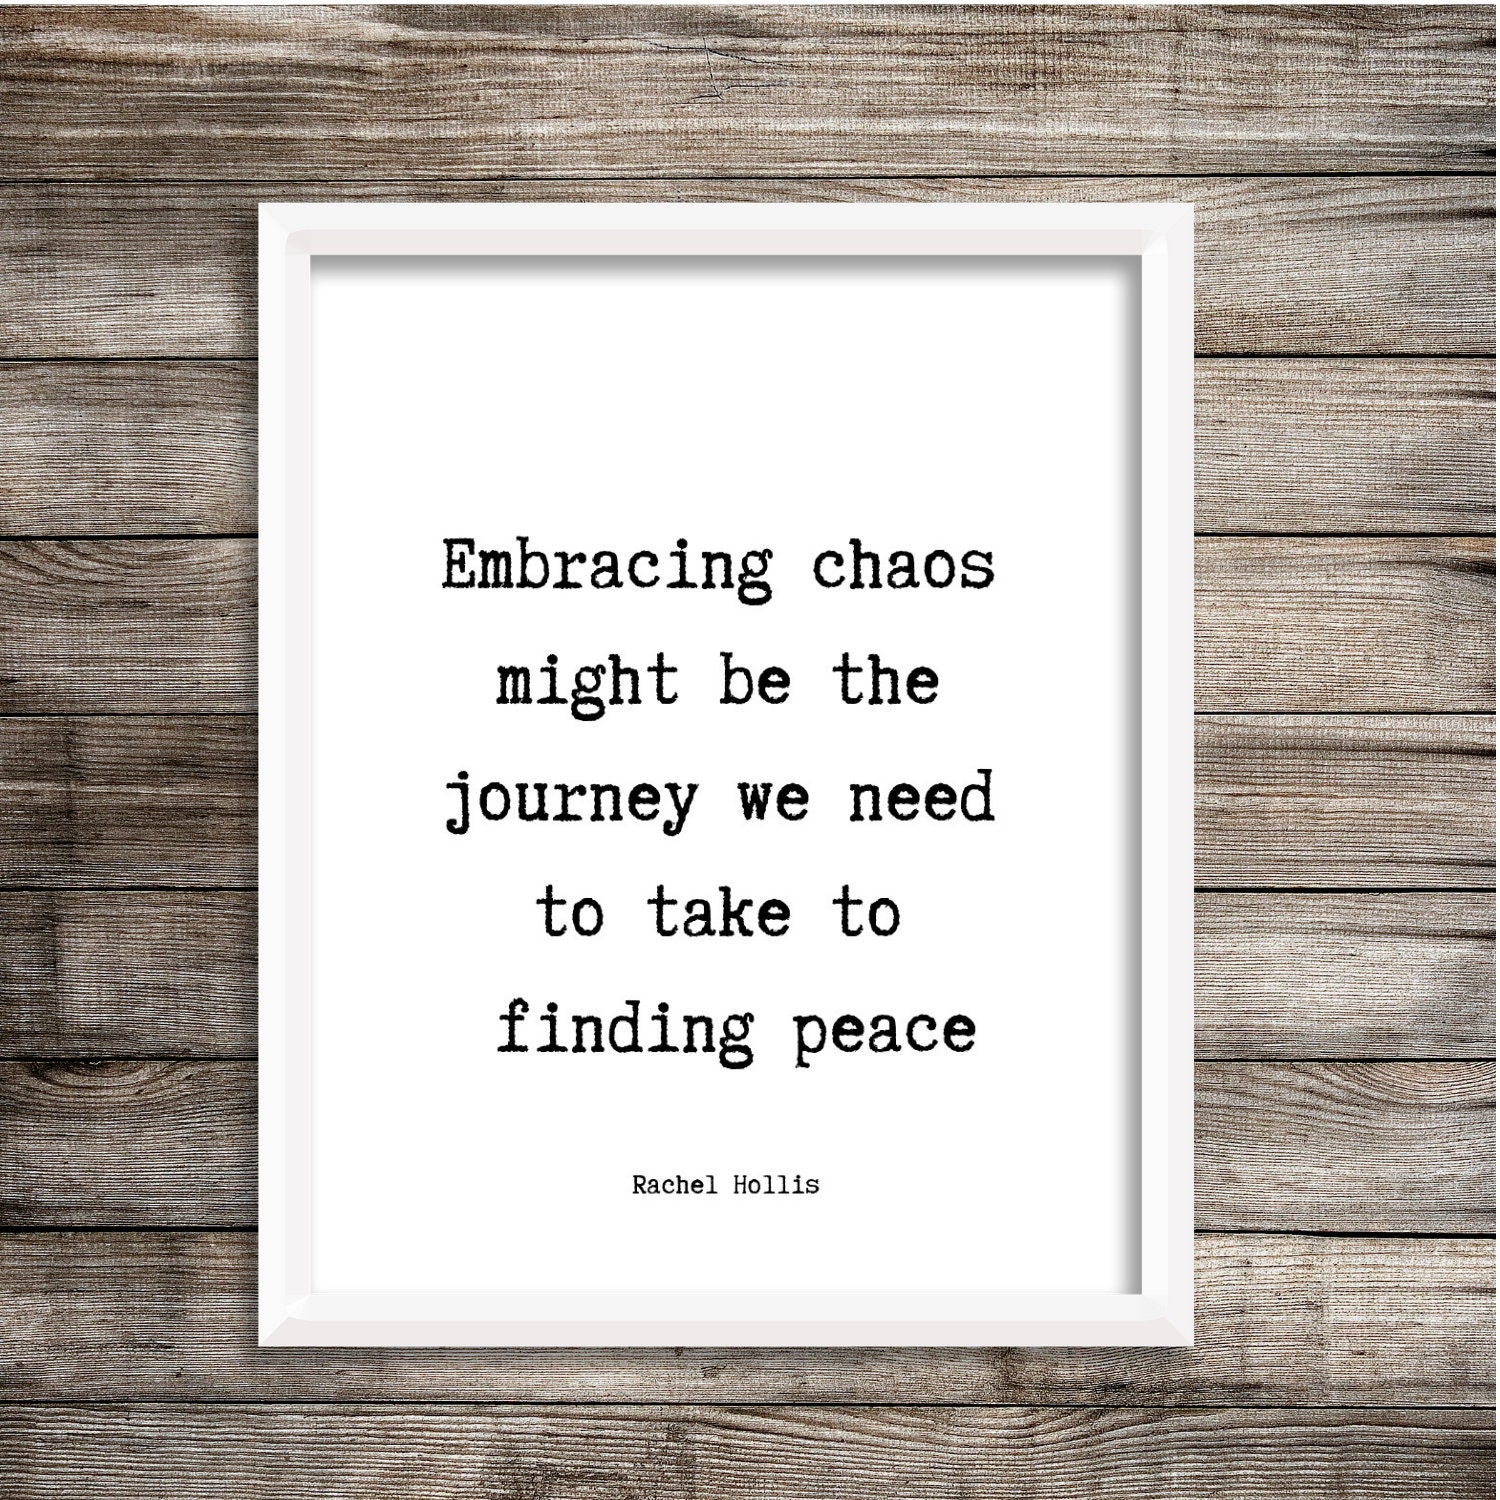 Enjoy the View: Embrace the Journey - Teach Better